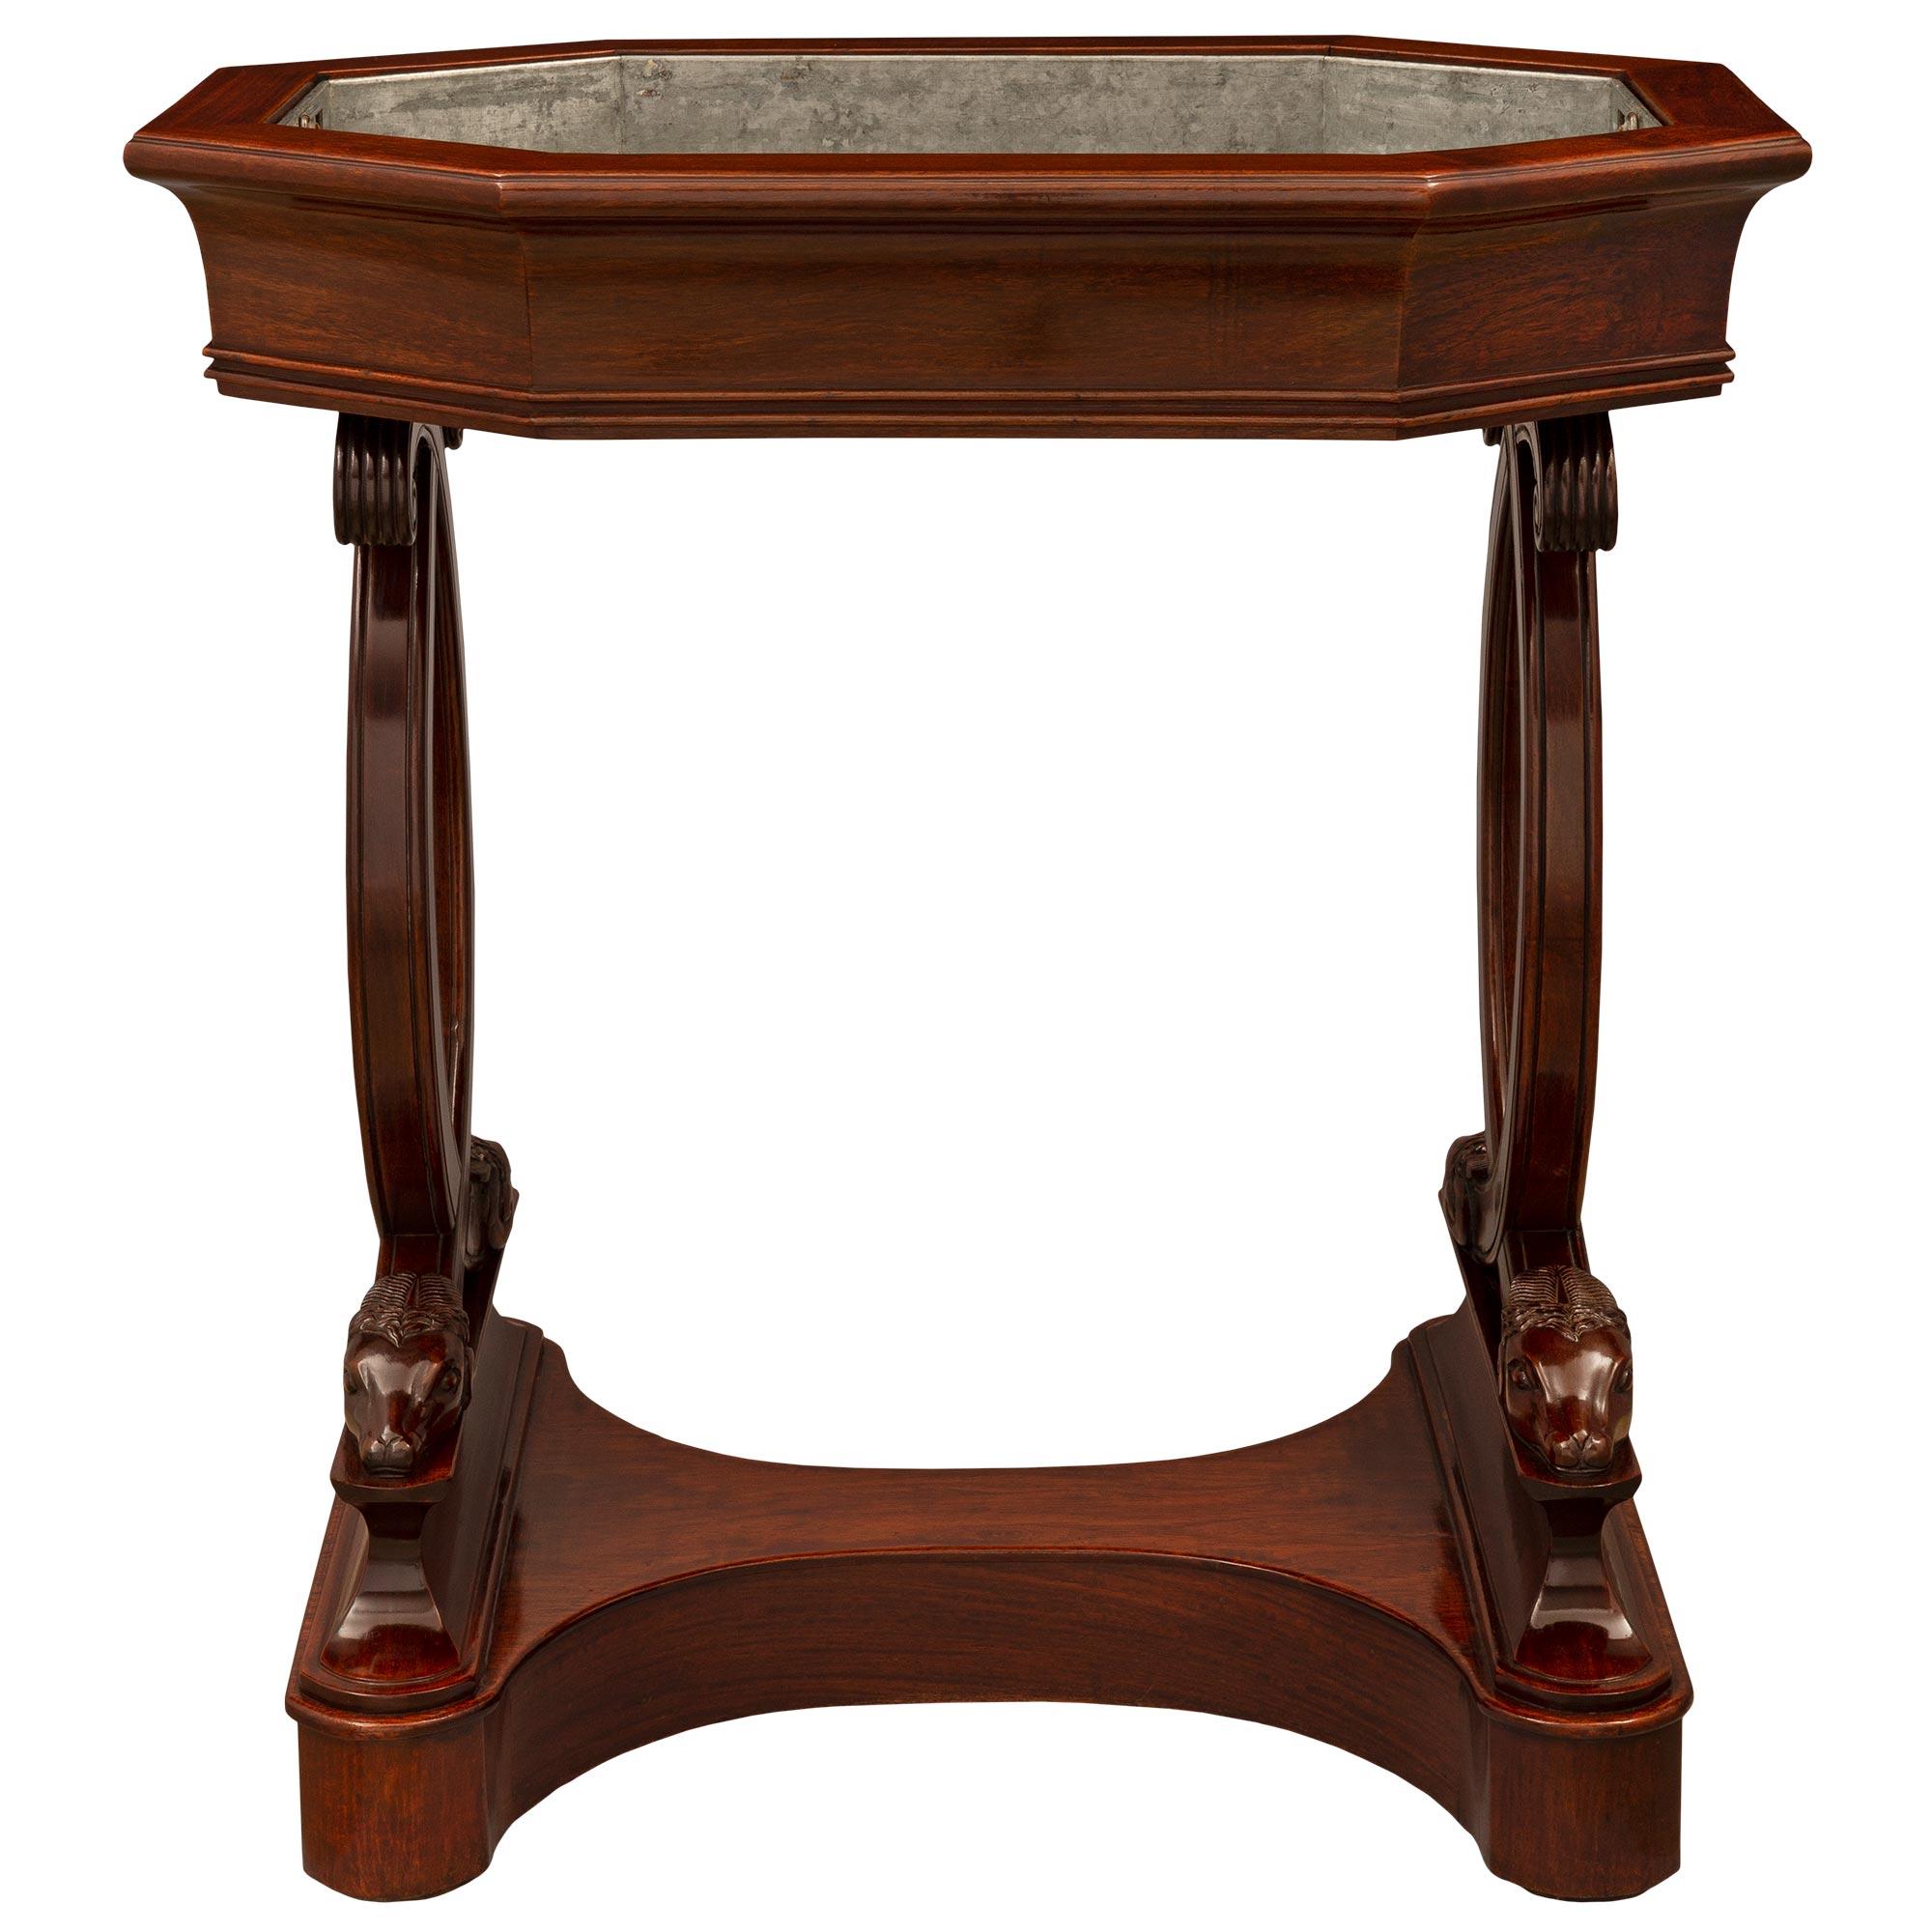 French Early 19th Century 1st Empire Period Mahogany Planter In Good Condition For Sale In West Palm Beach, FL